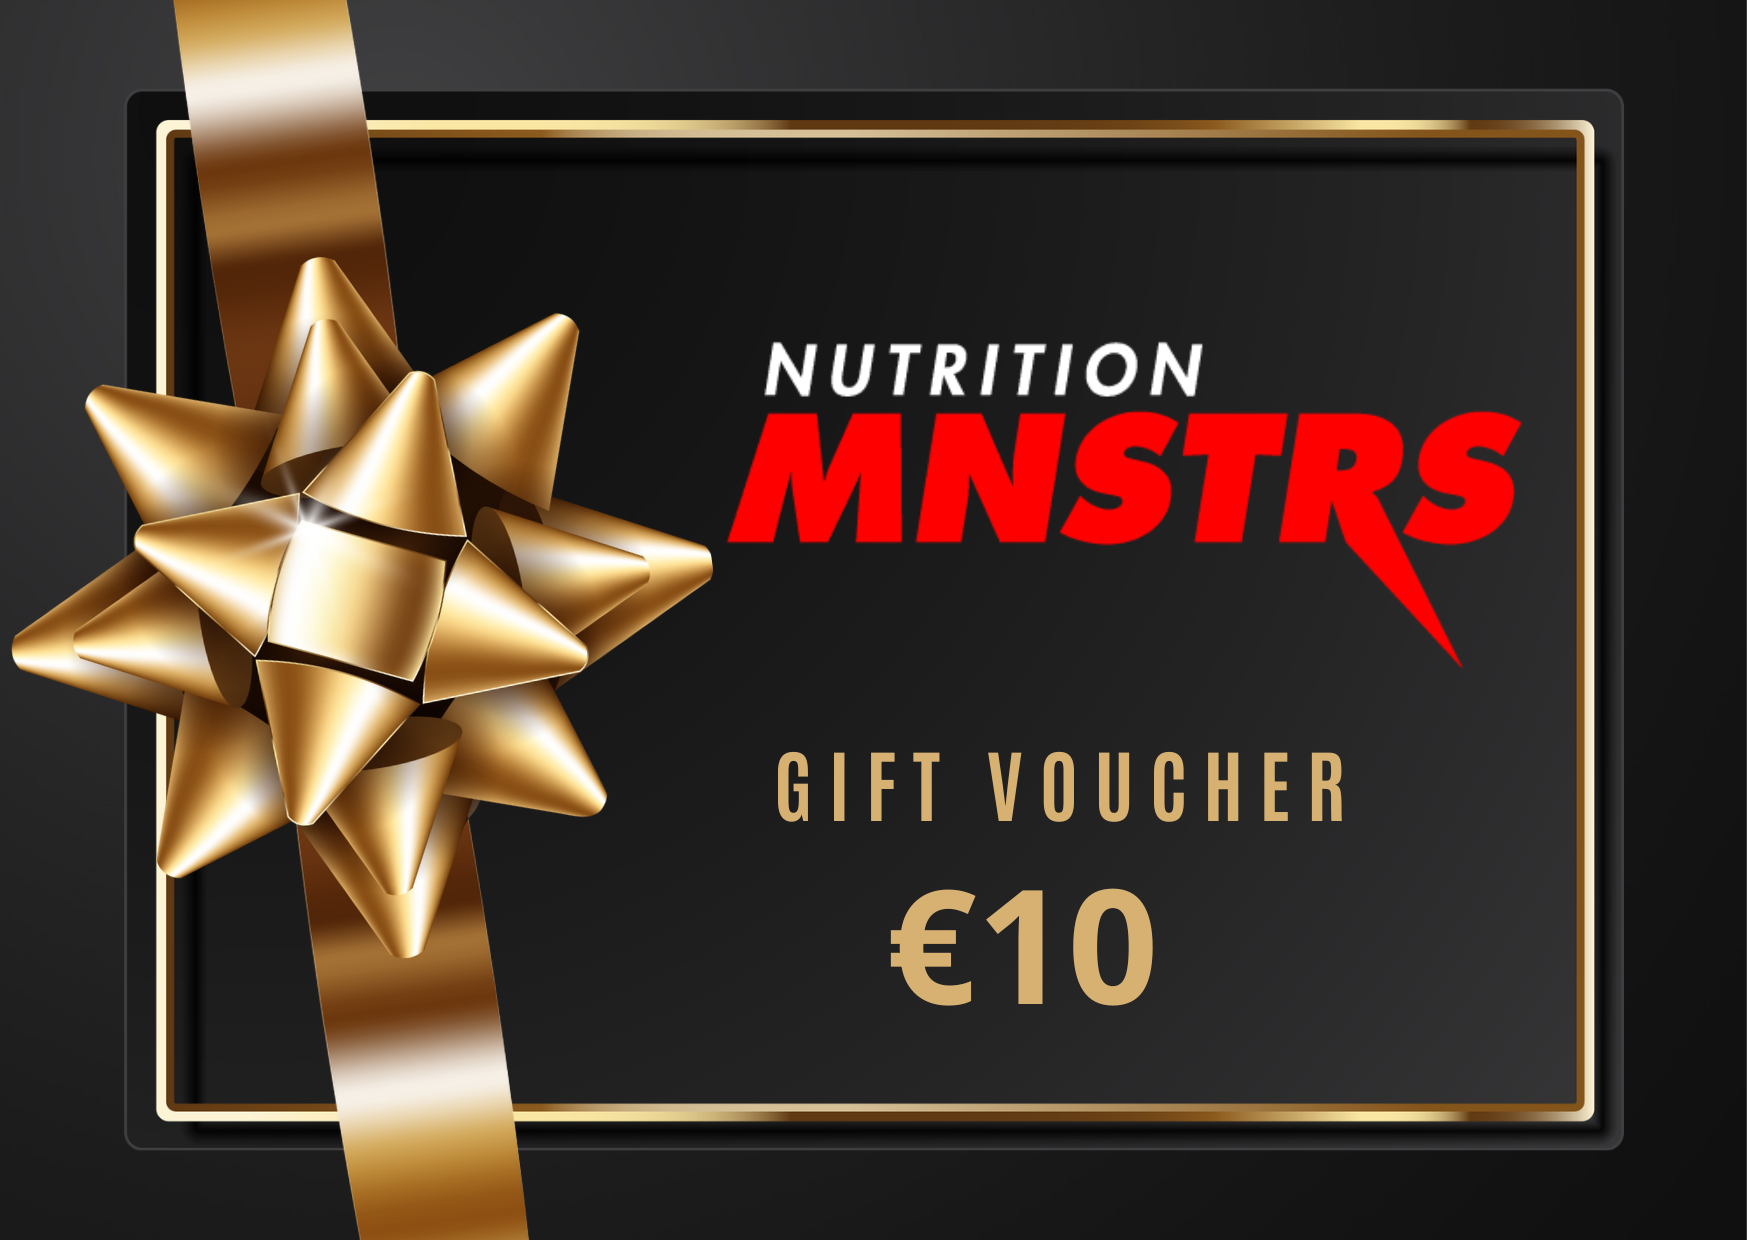 Gift voucher Nutrition Monsters